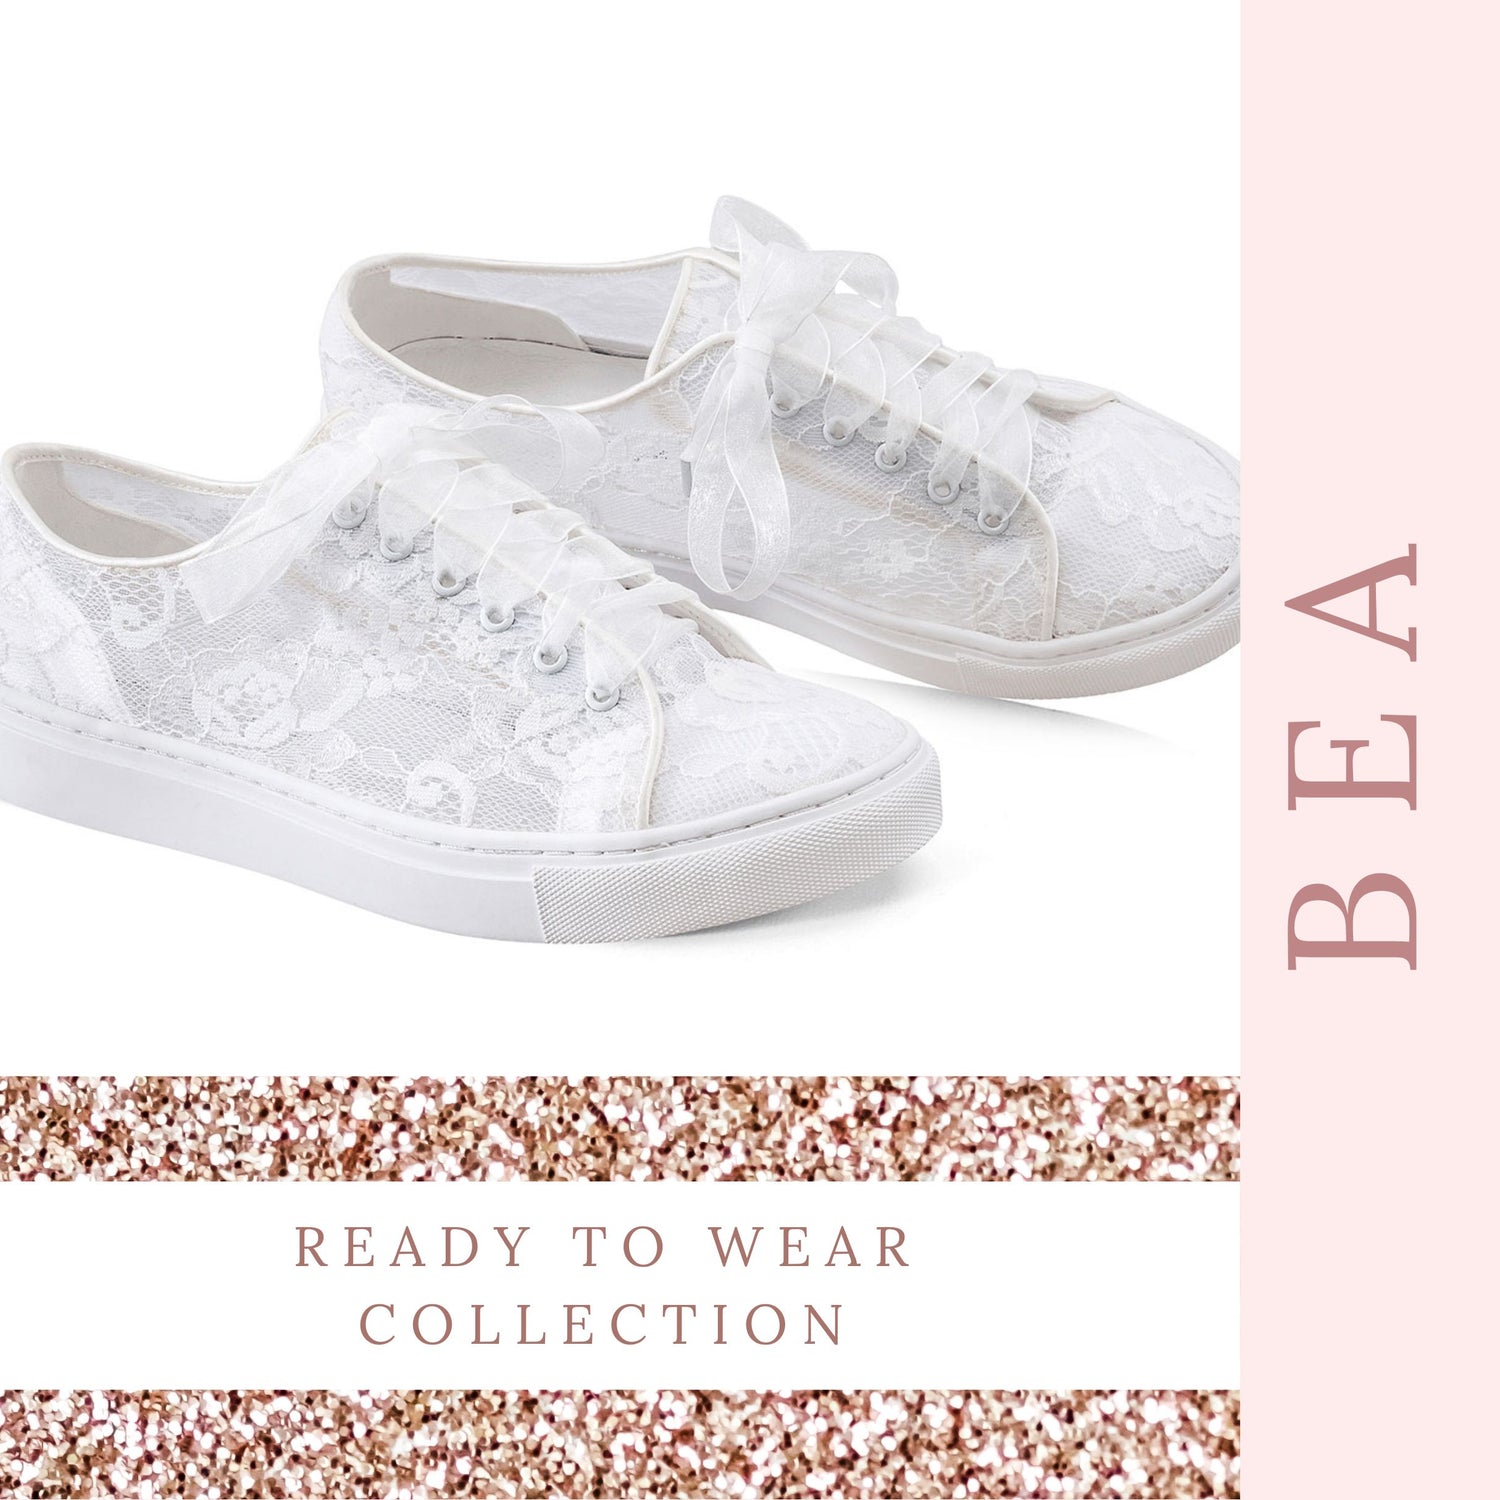 lace-sneakers-for-a-wedding